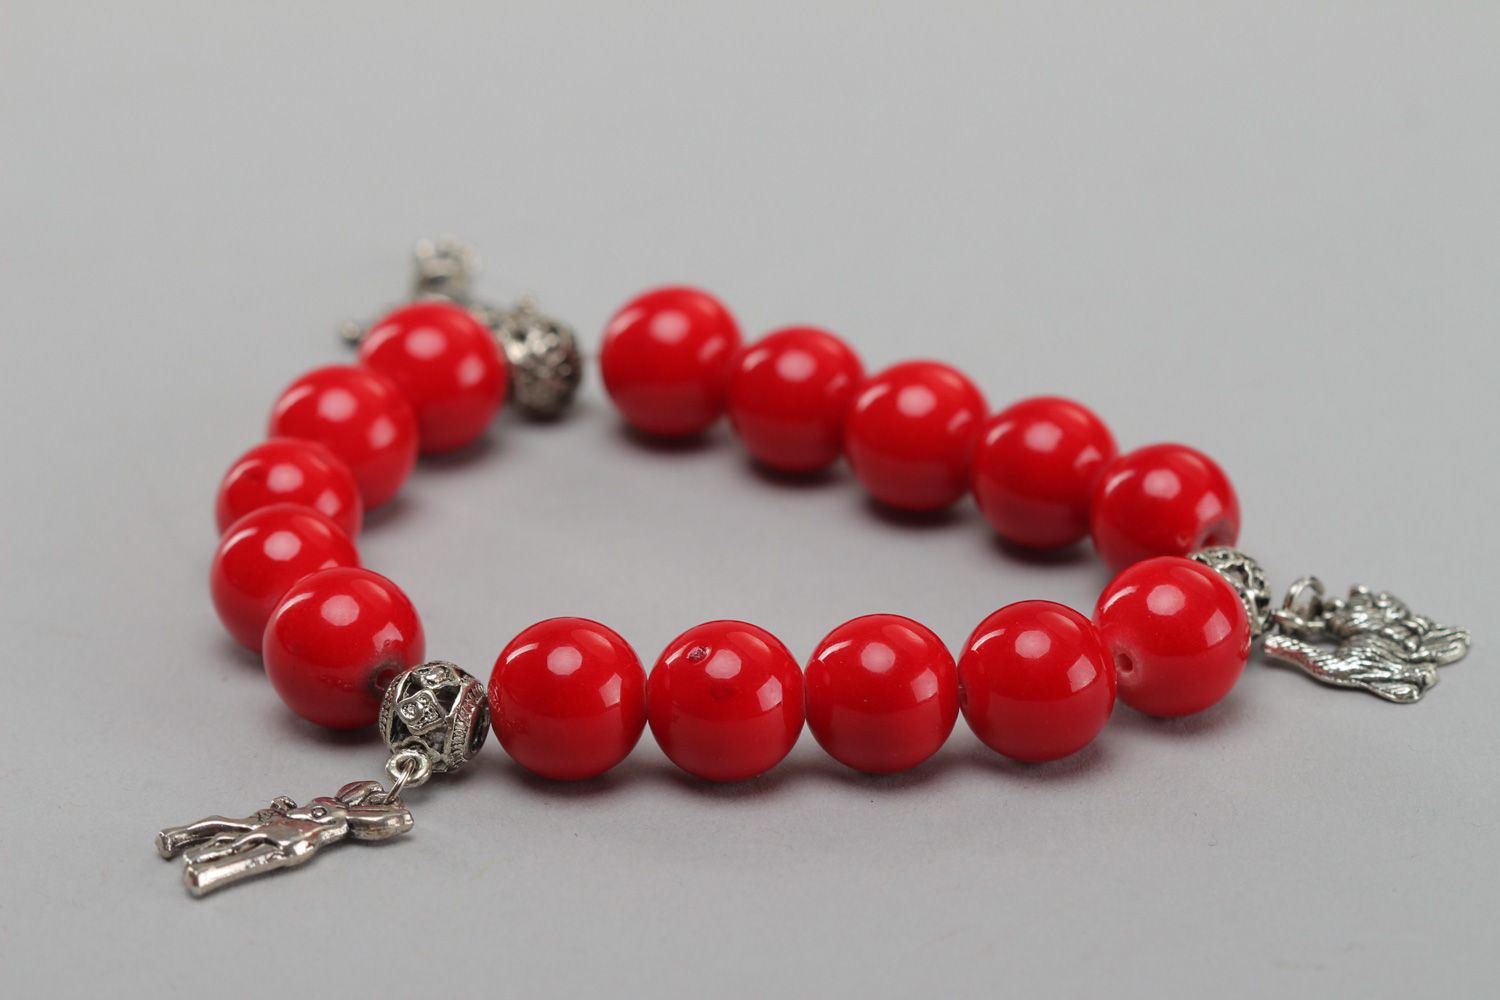 Handmade wrist bracelet with charms and beads of artificial coral for women photo 4